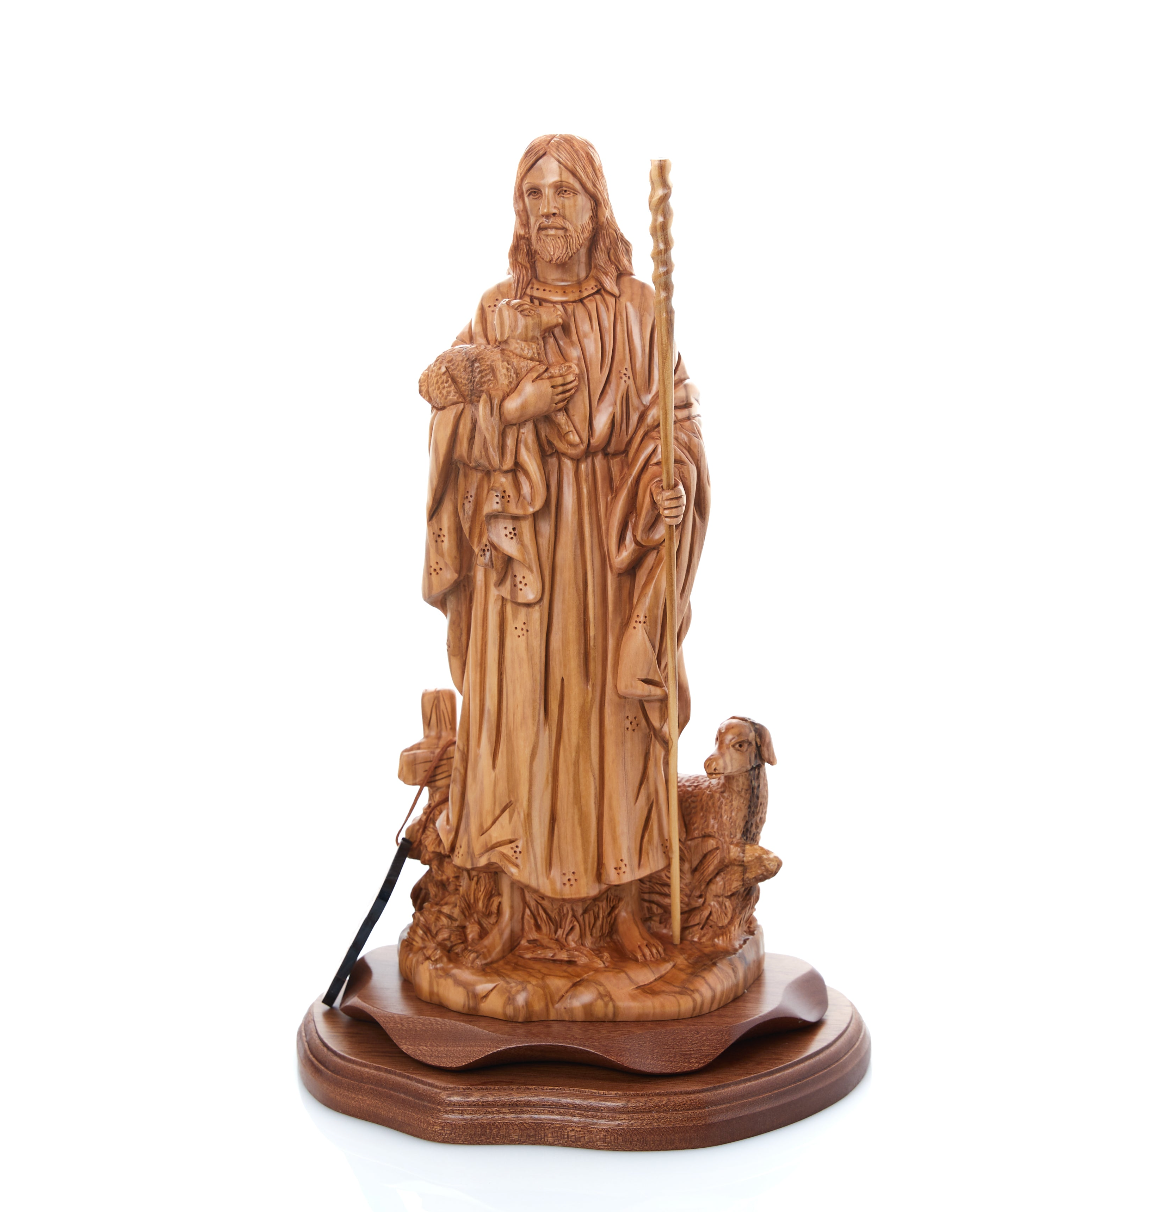 "The Good Shepherd" Jesus Christ , Olive Wood Carving 14.8", Statue from the Holy Land